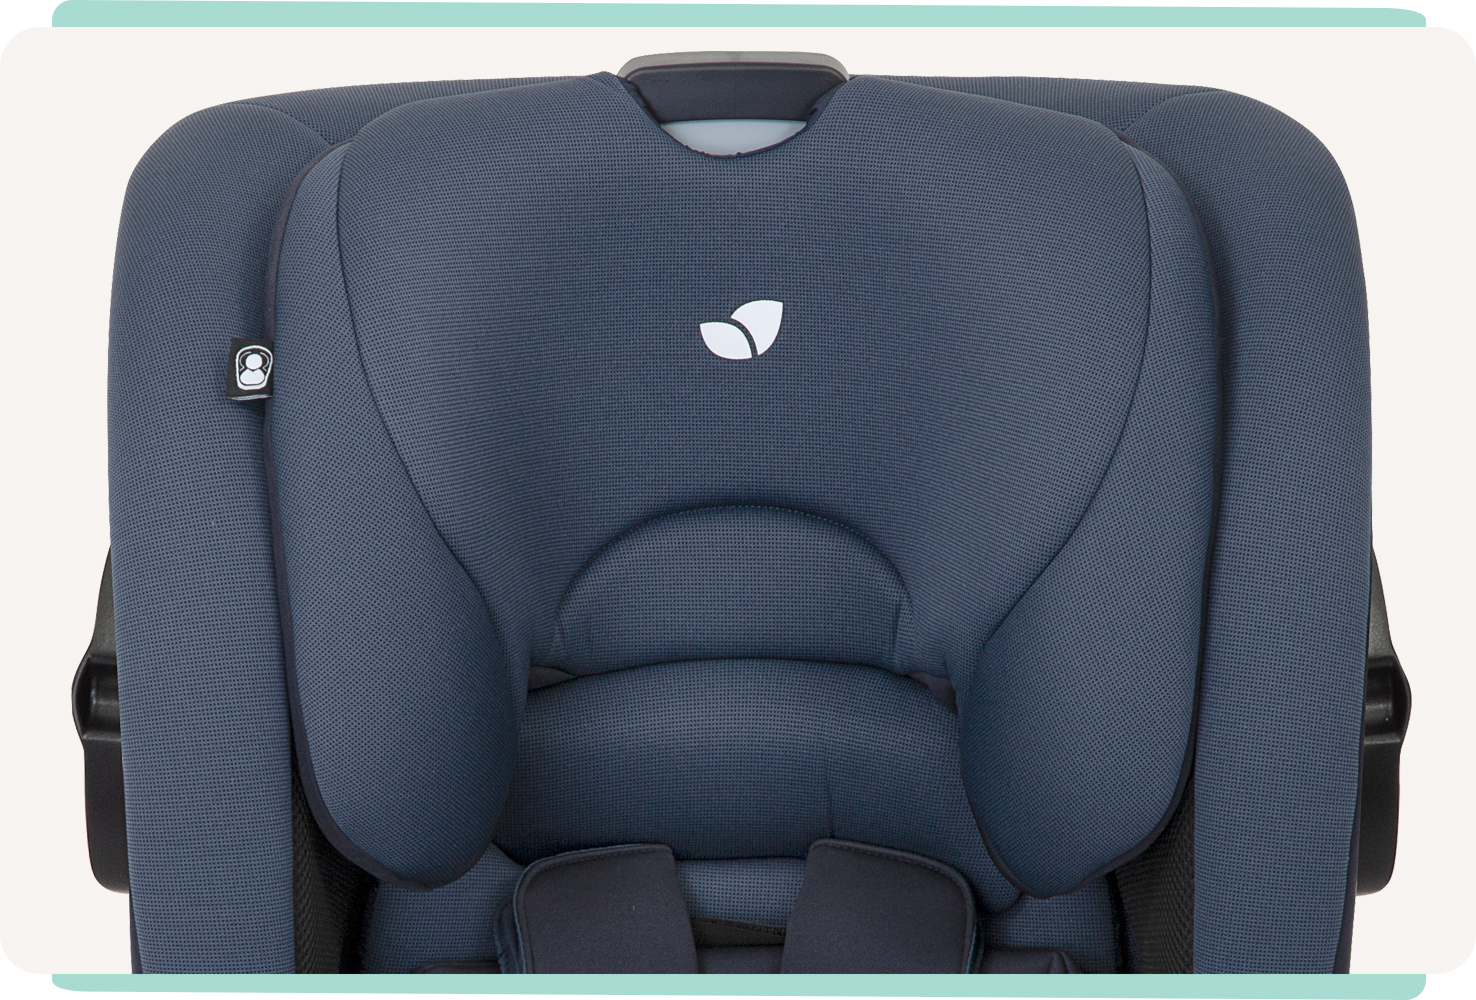 Close-up of the headrest on a dark blue Joie bold toddler car seat.